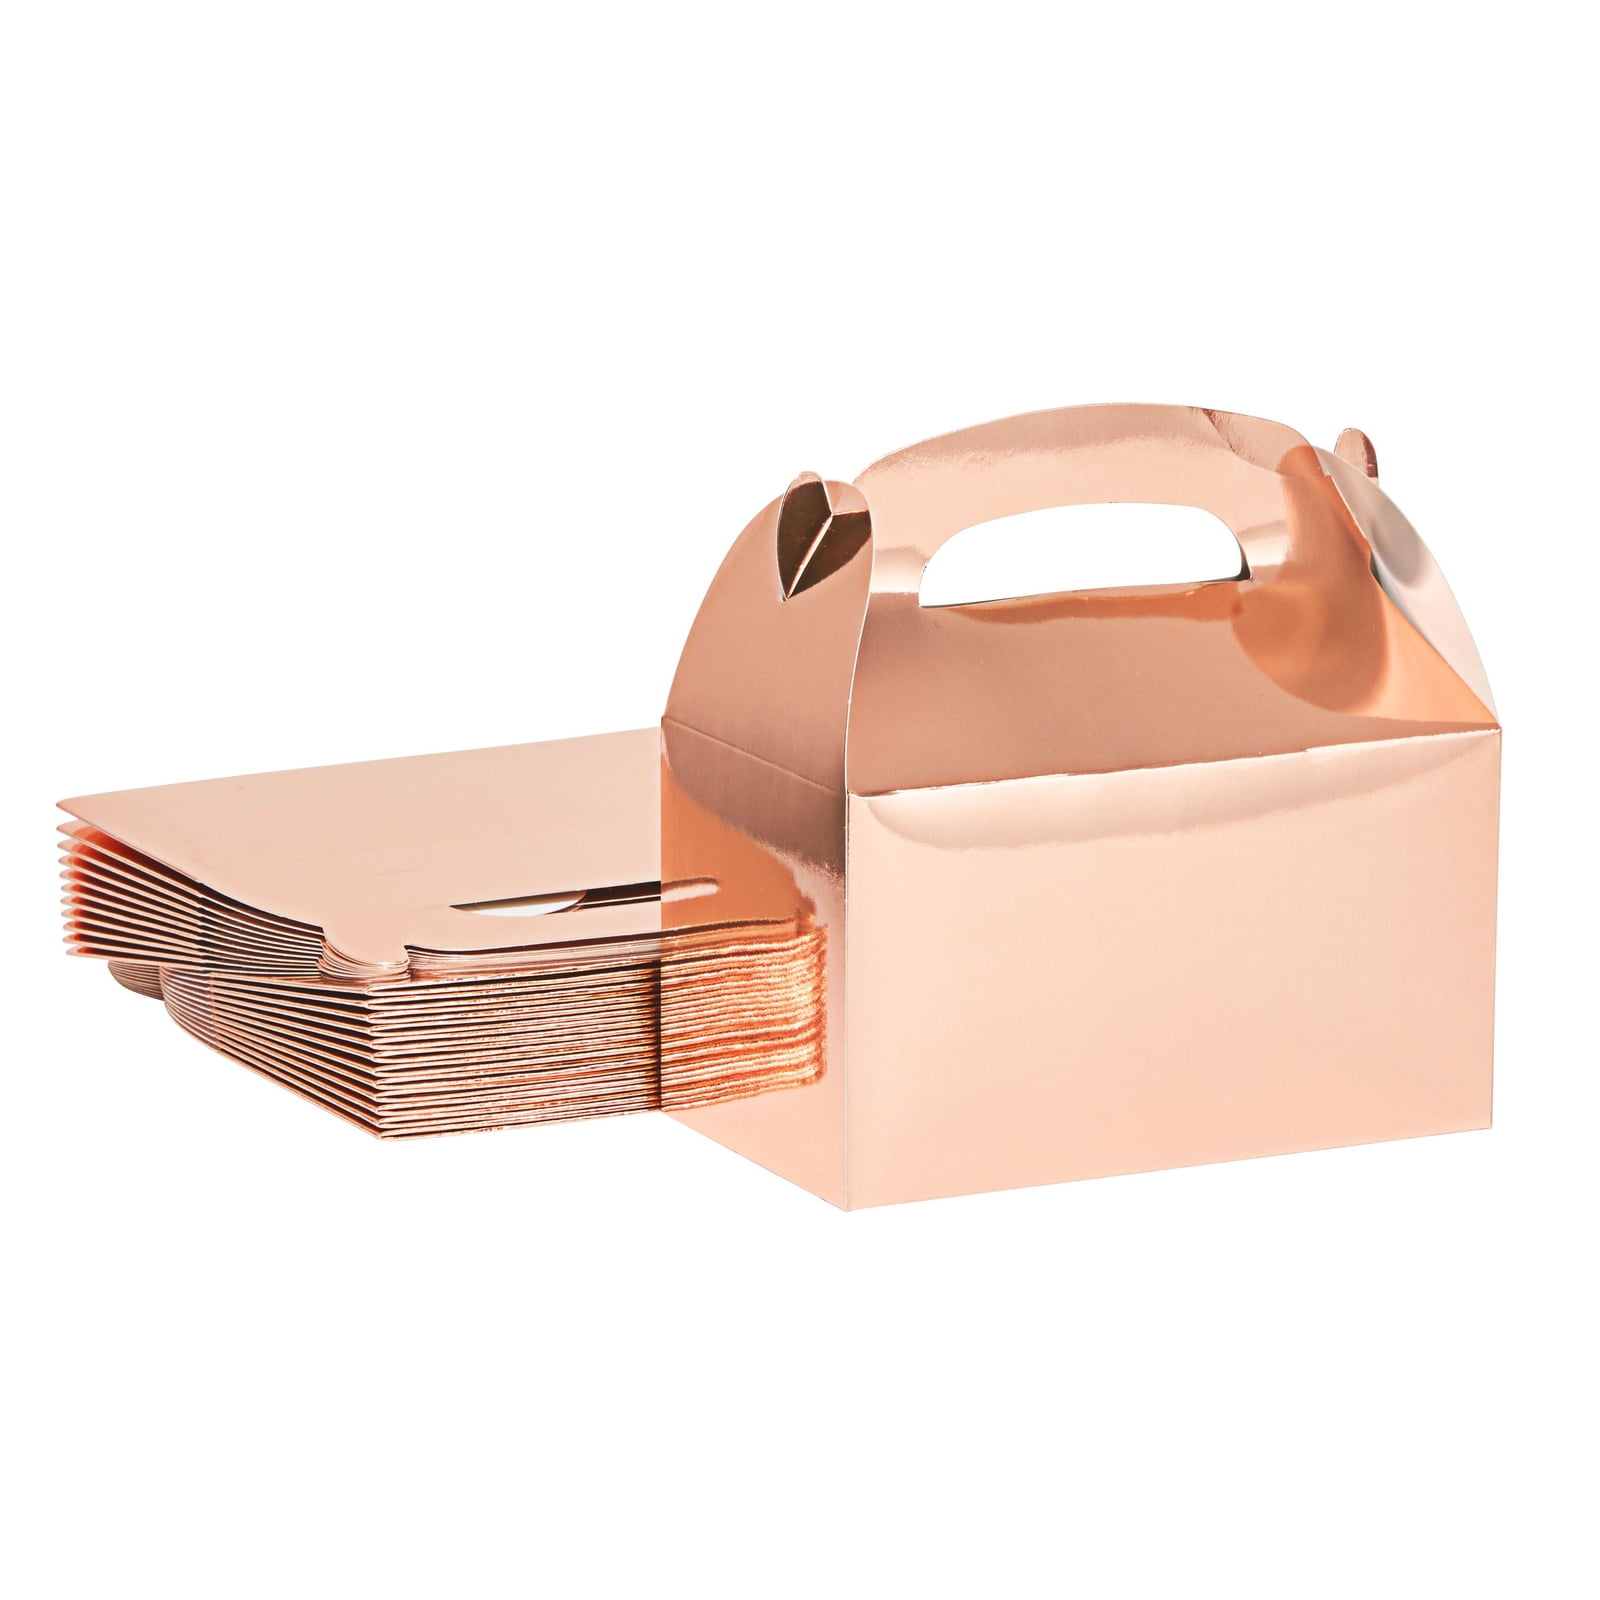 Portable Art and Craft Organizer with Handle 1 Pack Plastic Storage Case, Clear with Rose Gold Accents 